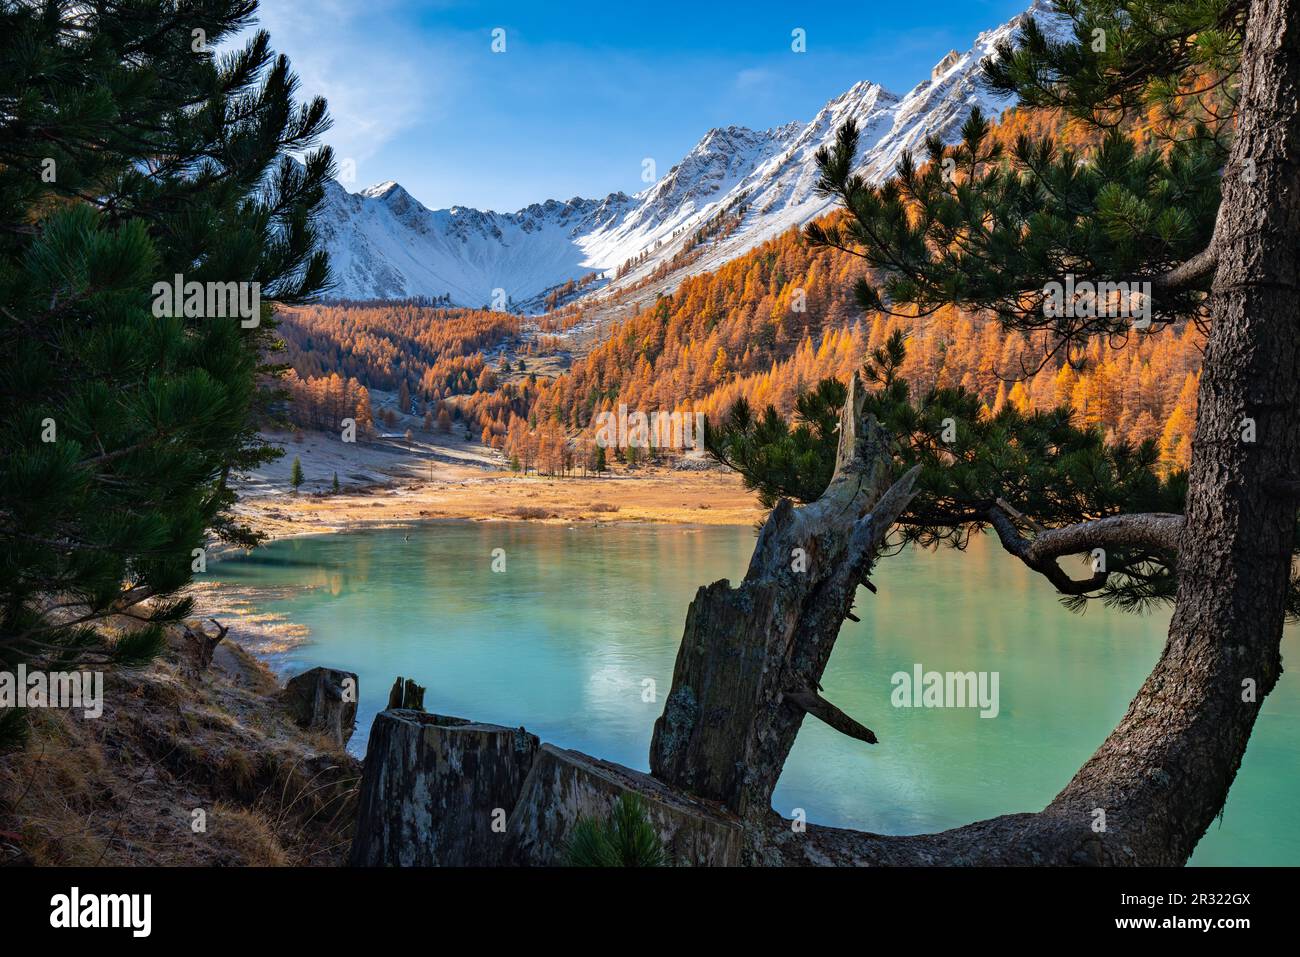 Orceyrette Lake in Autumn with golden larch trees and snow covered mountain peaks. Briancon Region in the Hautes-Alpes (French Alps). France Stock Photo